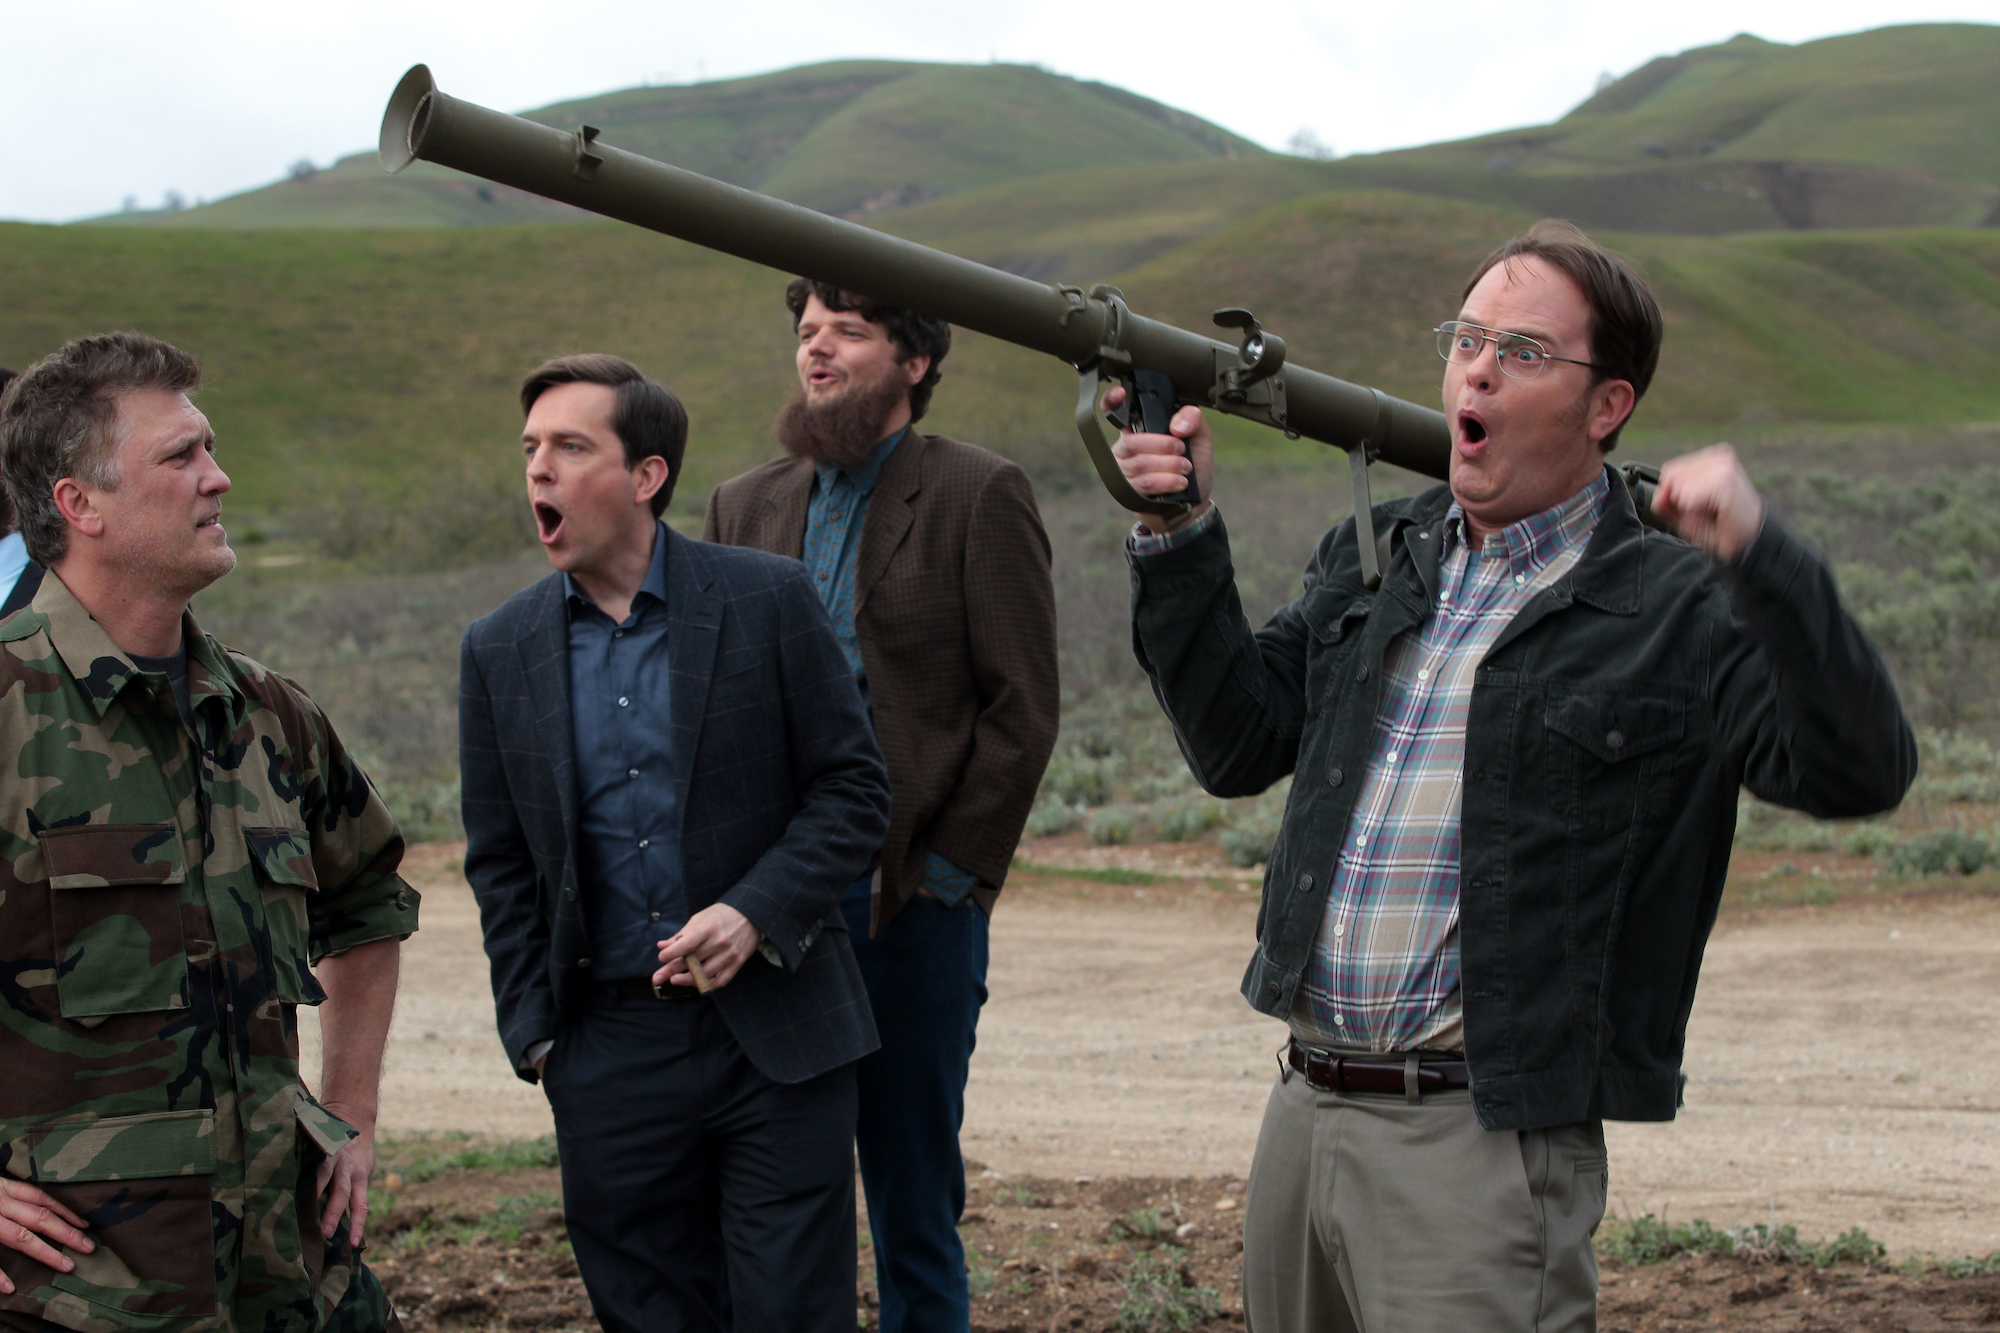 A still from season 9 of 'The Office' featuring a military man looking disapprovingly at Andy Bernard, played by Ed Helms, and Dwight Schrute, played by Rainn Wilson, who is holding a large gun